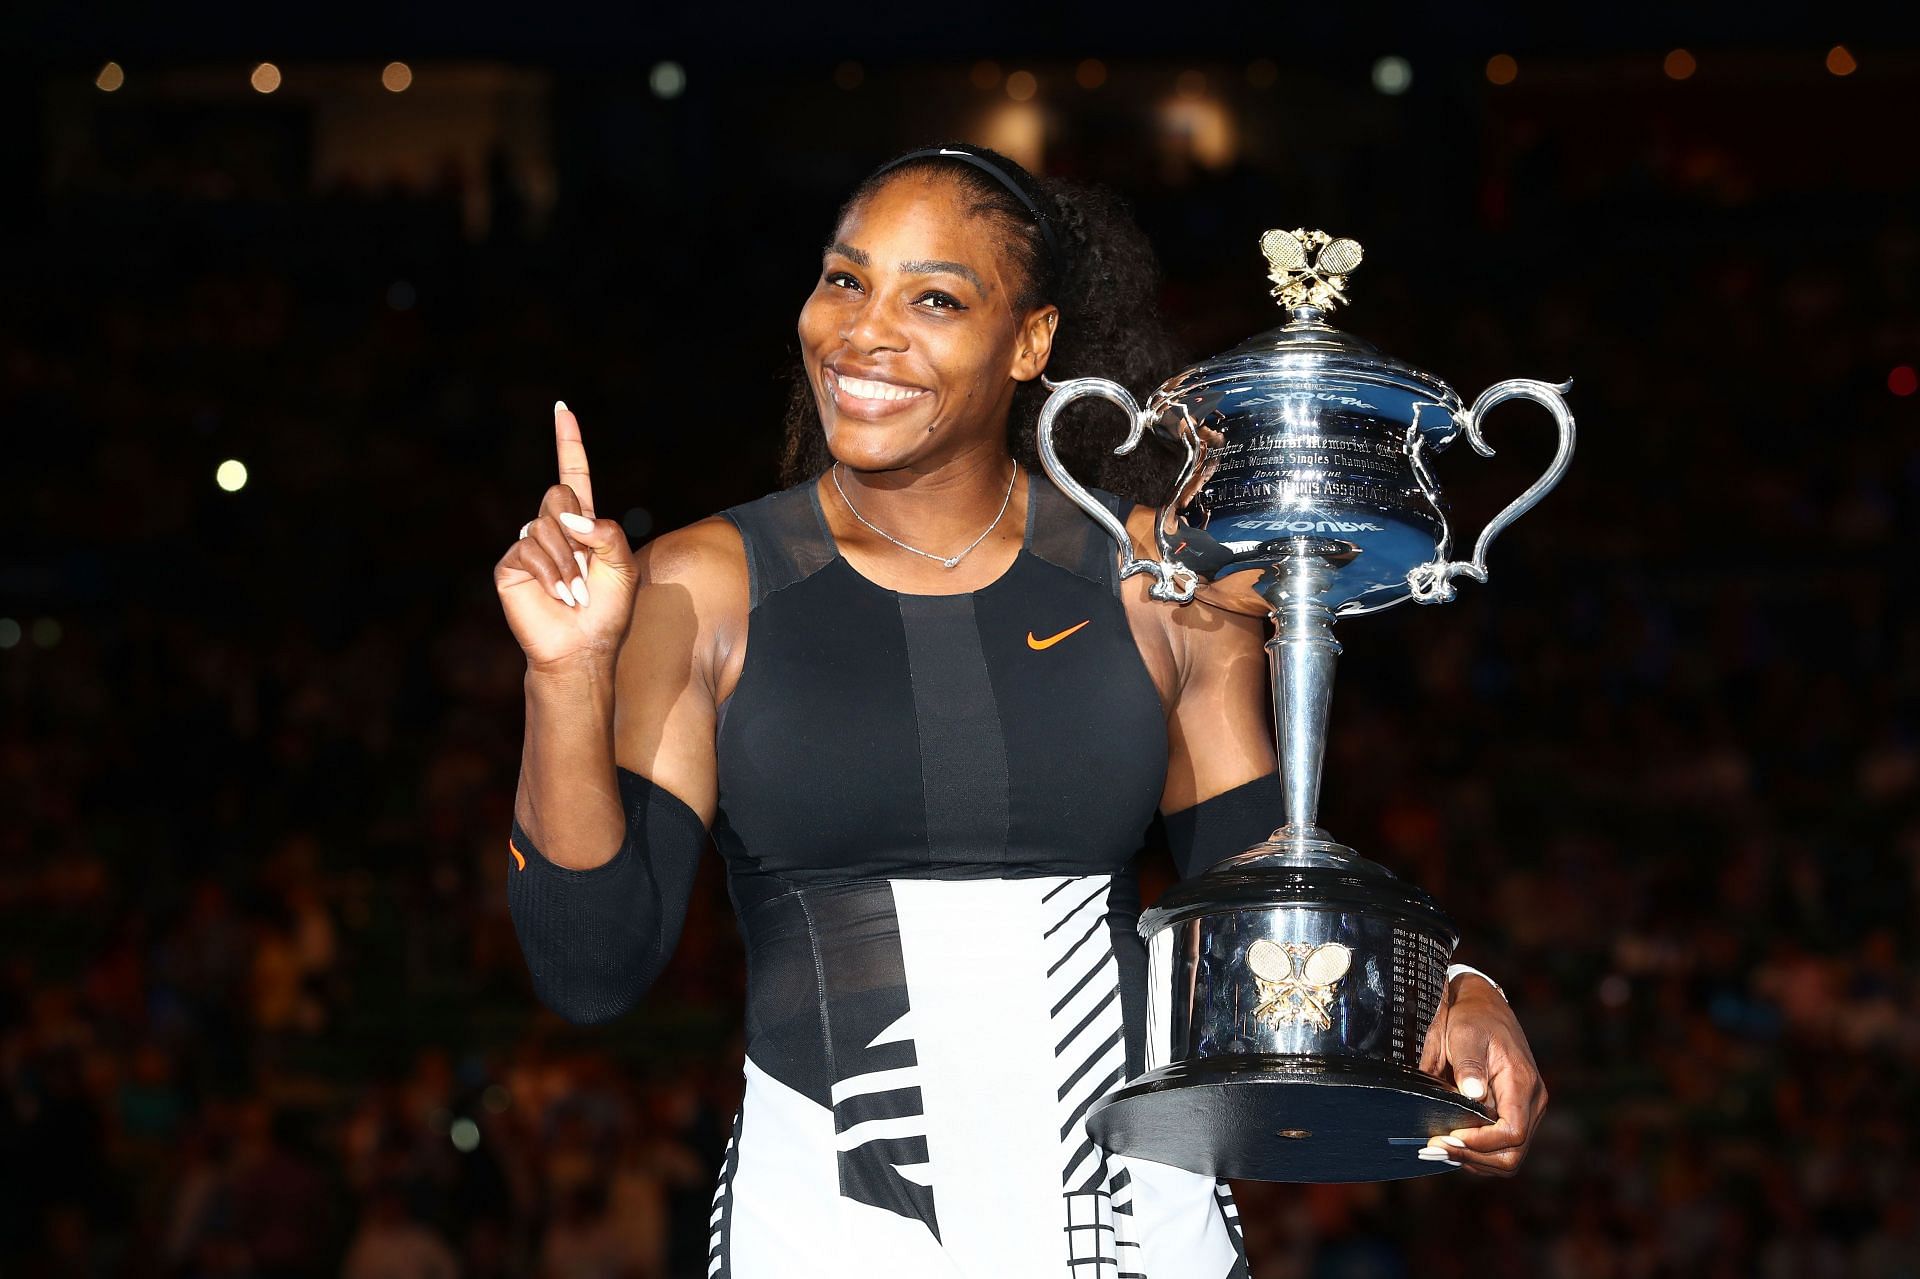 Serena Williams posted a video on her Instagram profile looking back on her career